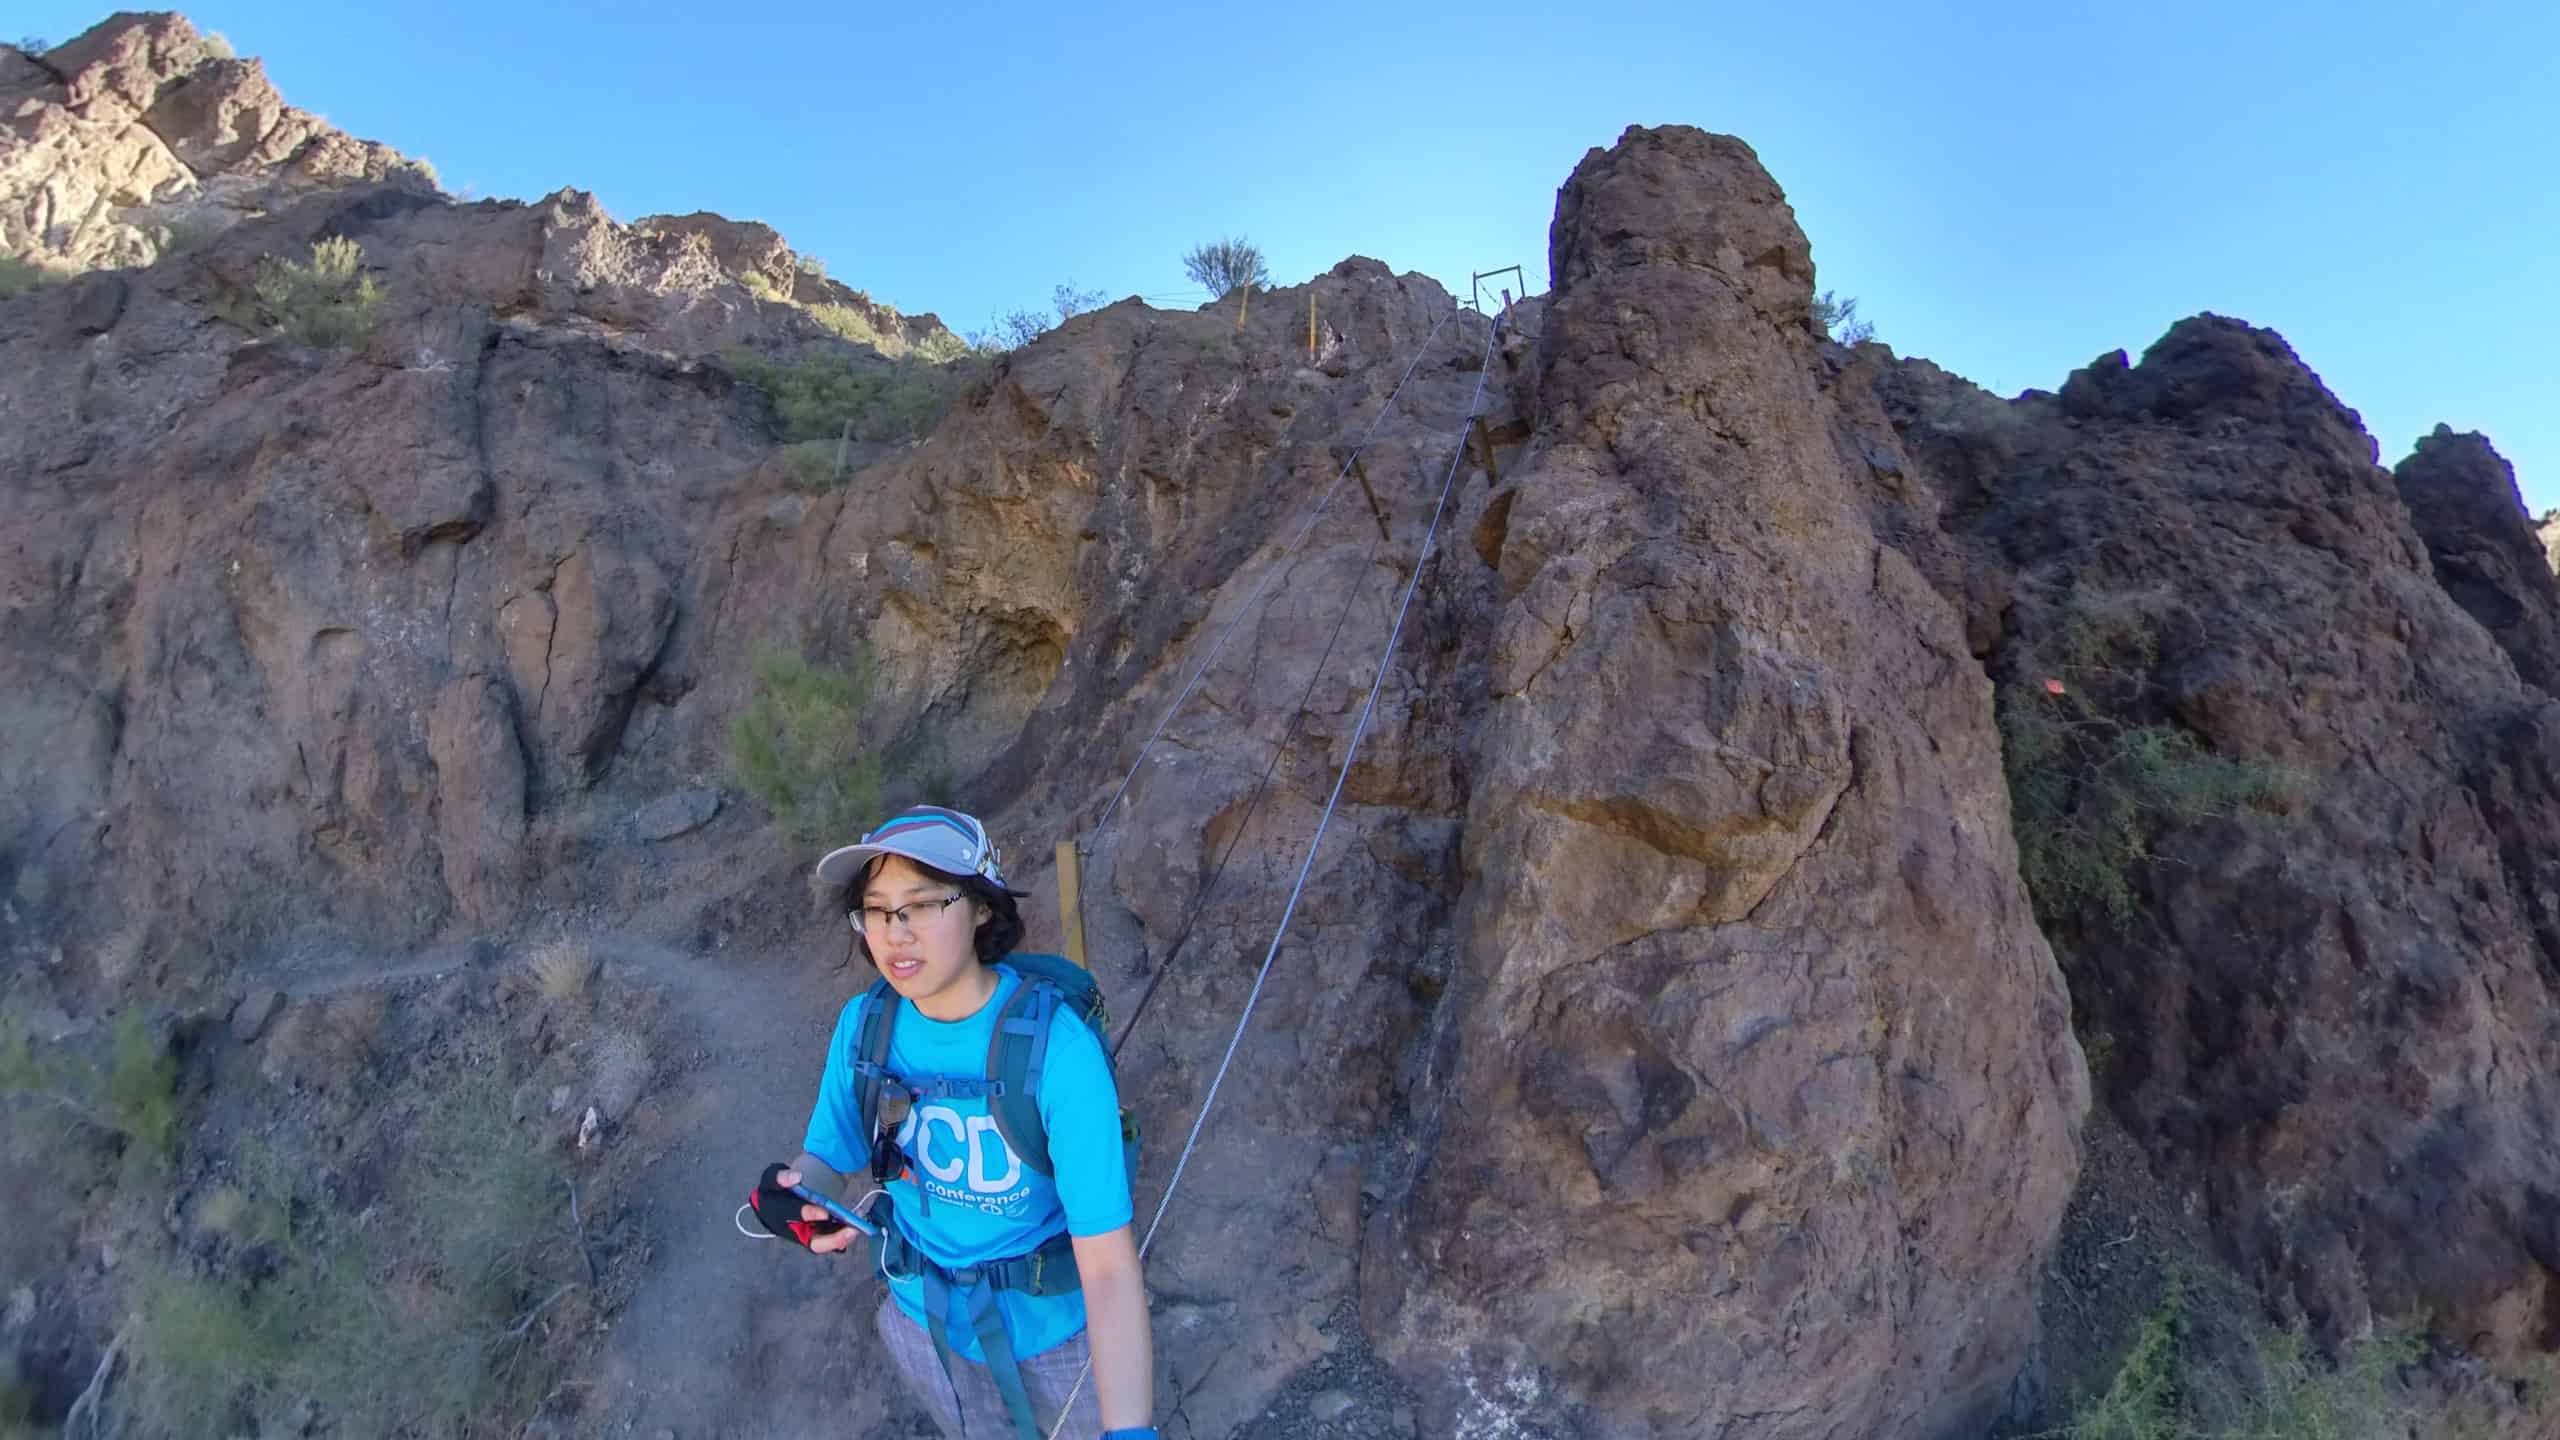 Meggie is wear a blue shirt that says "OCD" and has on red and black gloves. She is wearing a blue backpack and ballcap. She is in the shadows of a large brown mountain. Behind her are the cables scaling up the steep mountainside. She is in Picacho Peak State Park between Tucson and Phoenix, Arizona, United States.